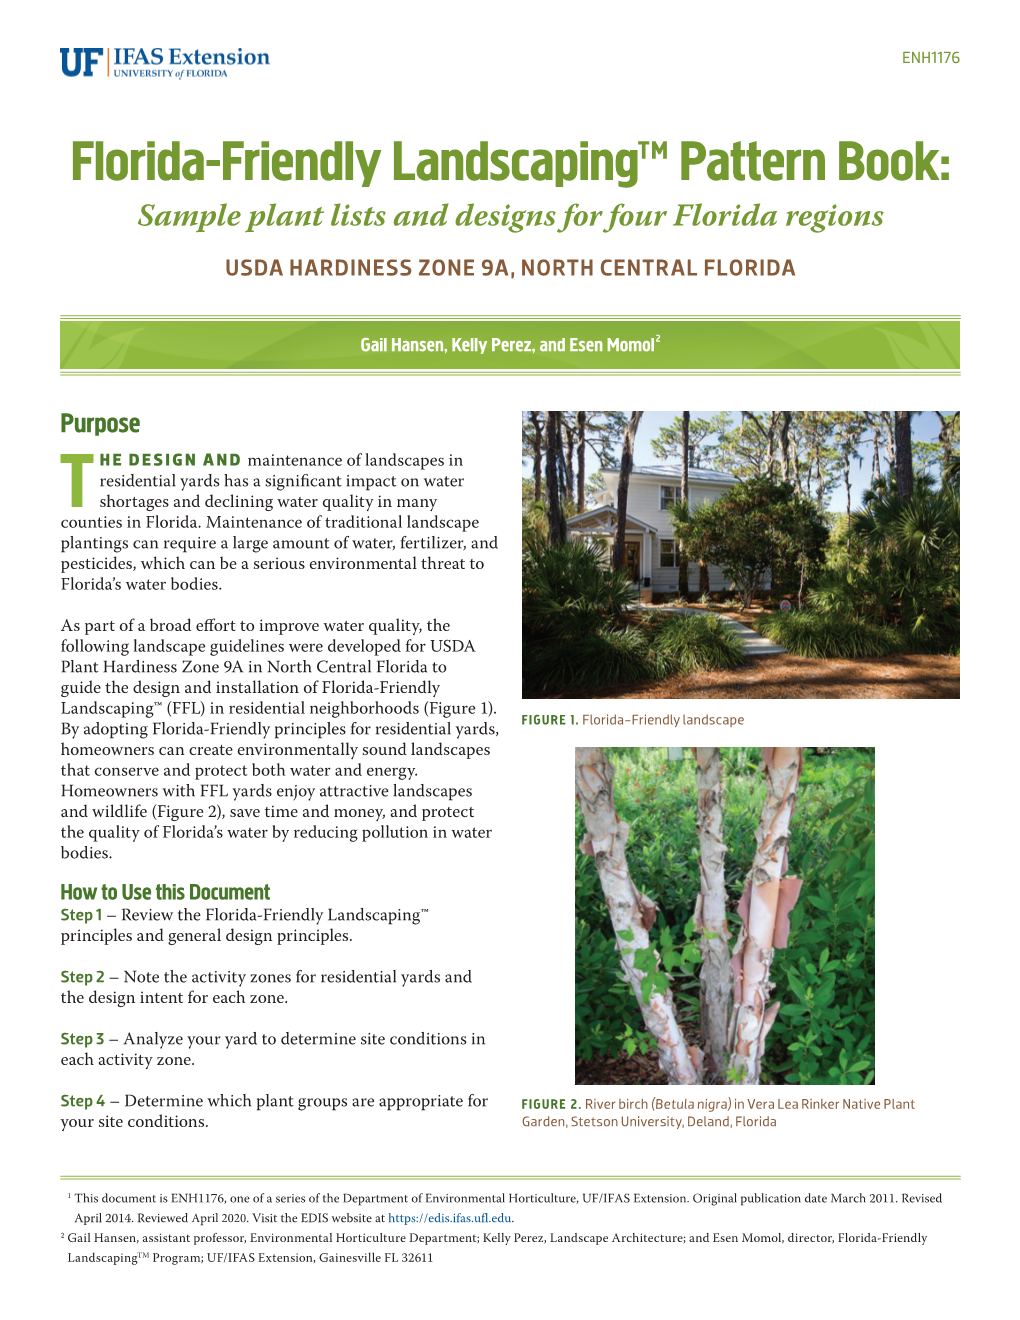 Florida-Friendly Landscaping™ Pattern Book: Sample Plant Lists and Designs for Four Florida Regions USDA HARDINESS ZONE 9A, NORTH CENTRAL FLORIDA